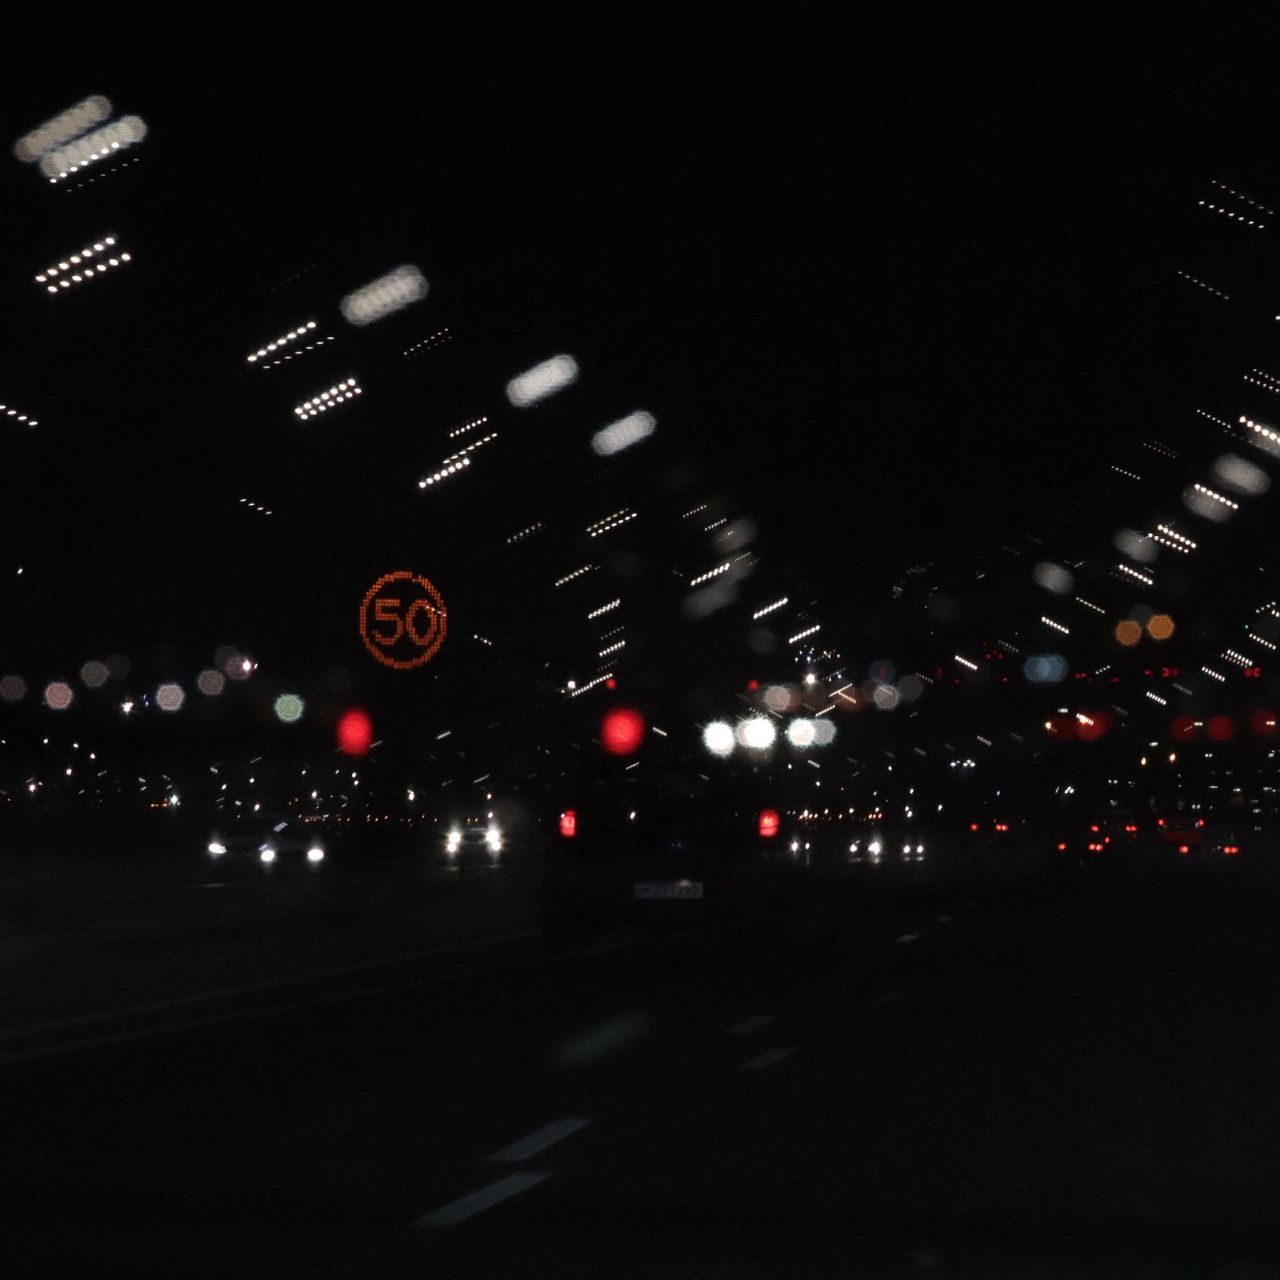 A blurry image of cars driving on the highway - Blurry